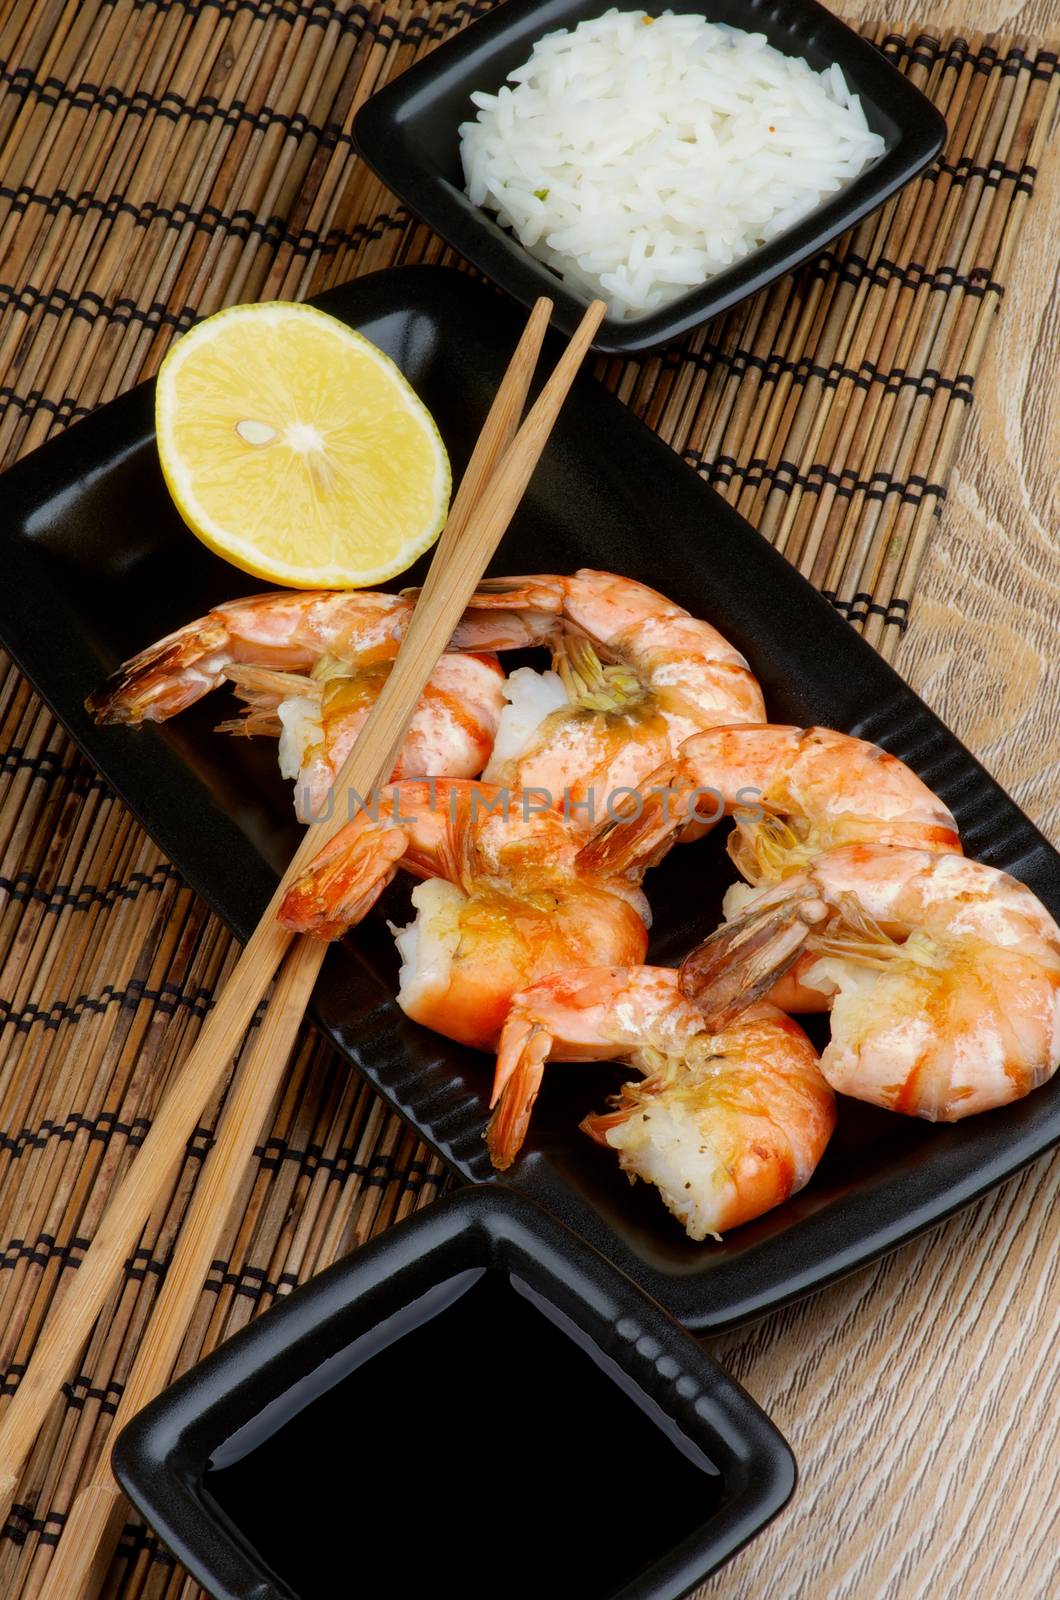 Delicious Roasted Shrimps with Lemon and Chopsticks, Soy Sauce and Boiled Rice in Square Bowls on Straw Mat background in Asian Style